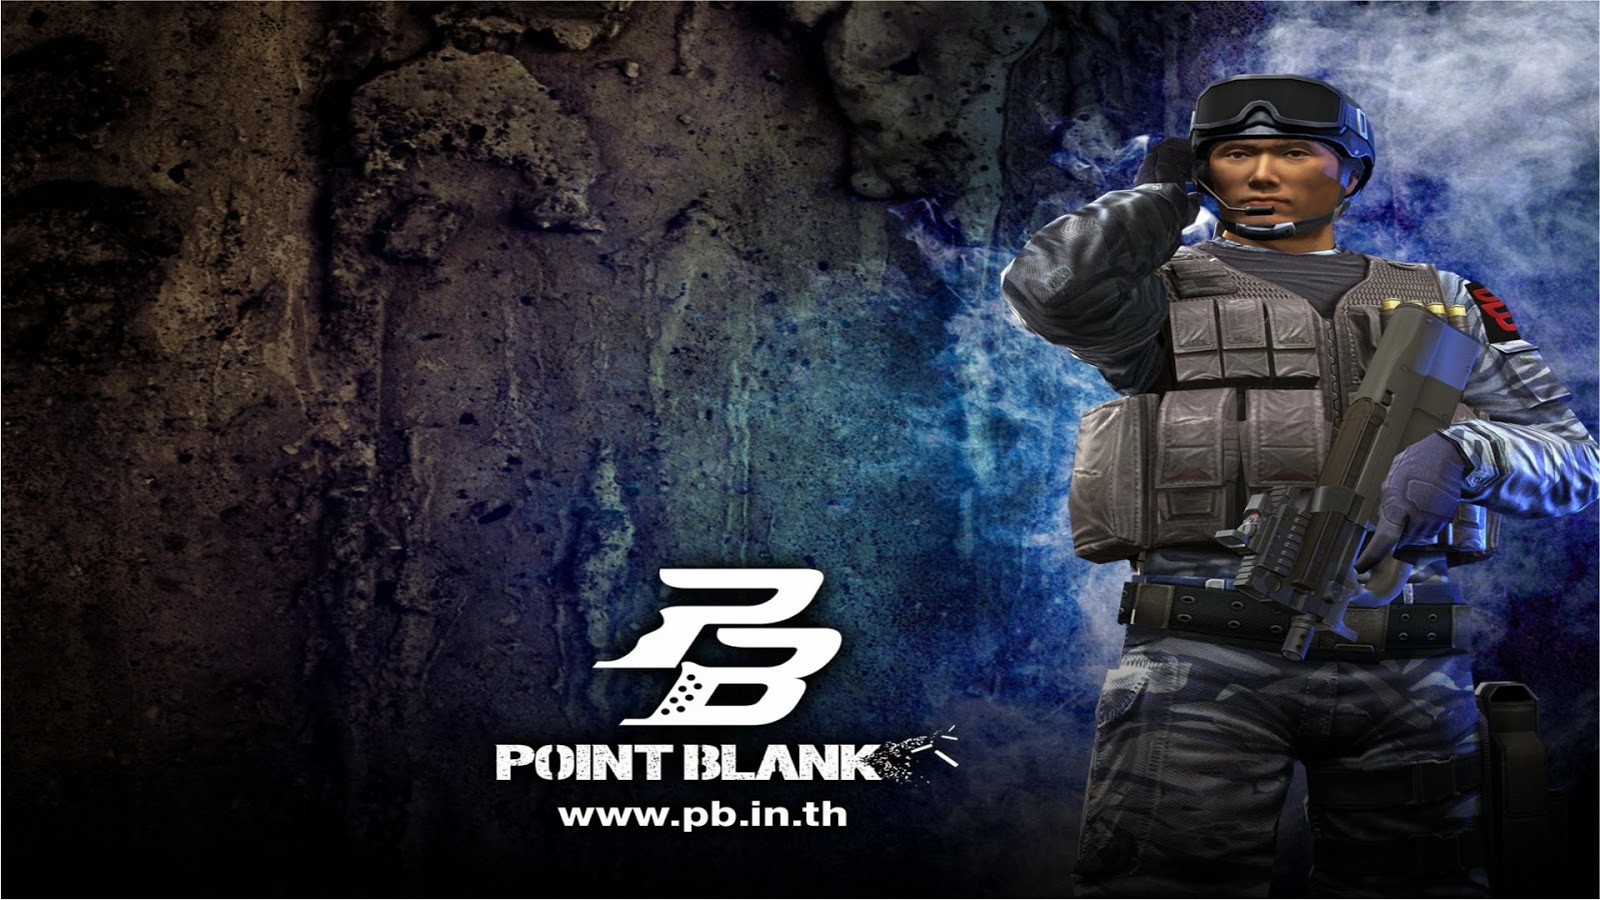 point blank wallpaper hd,action adventure game,pc game,shooter game,adventure game,movie